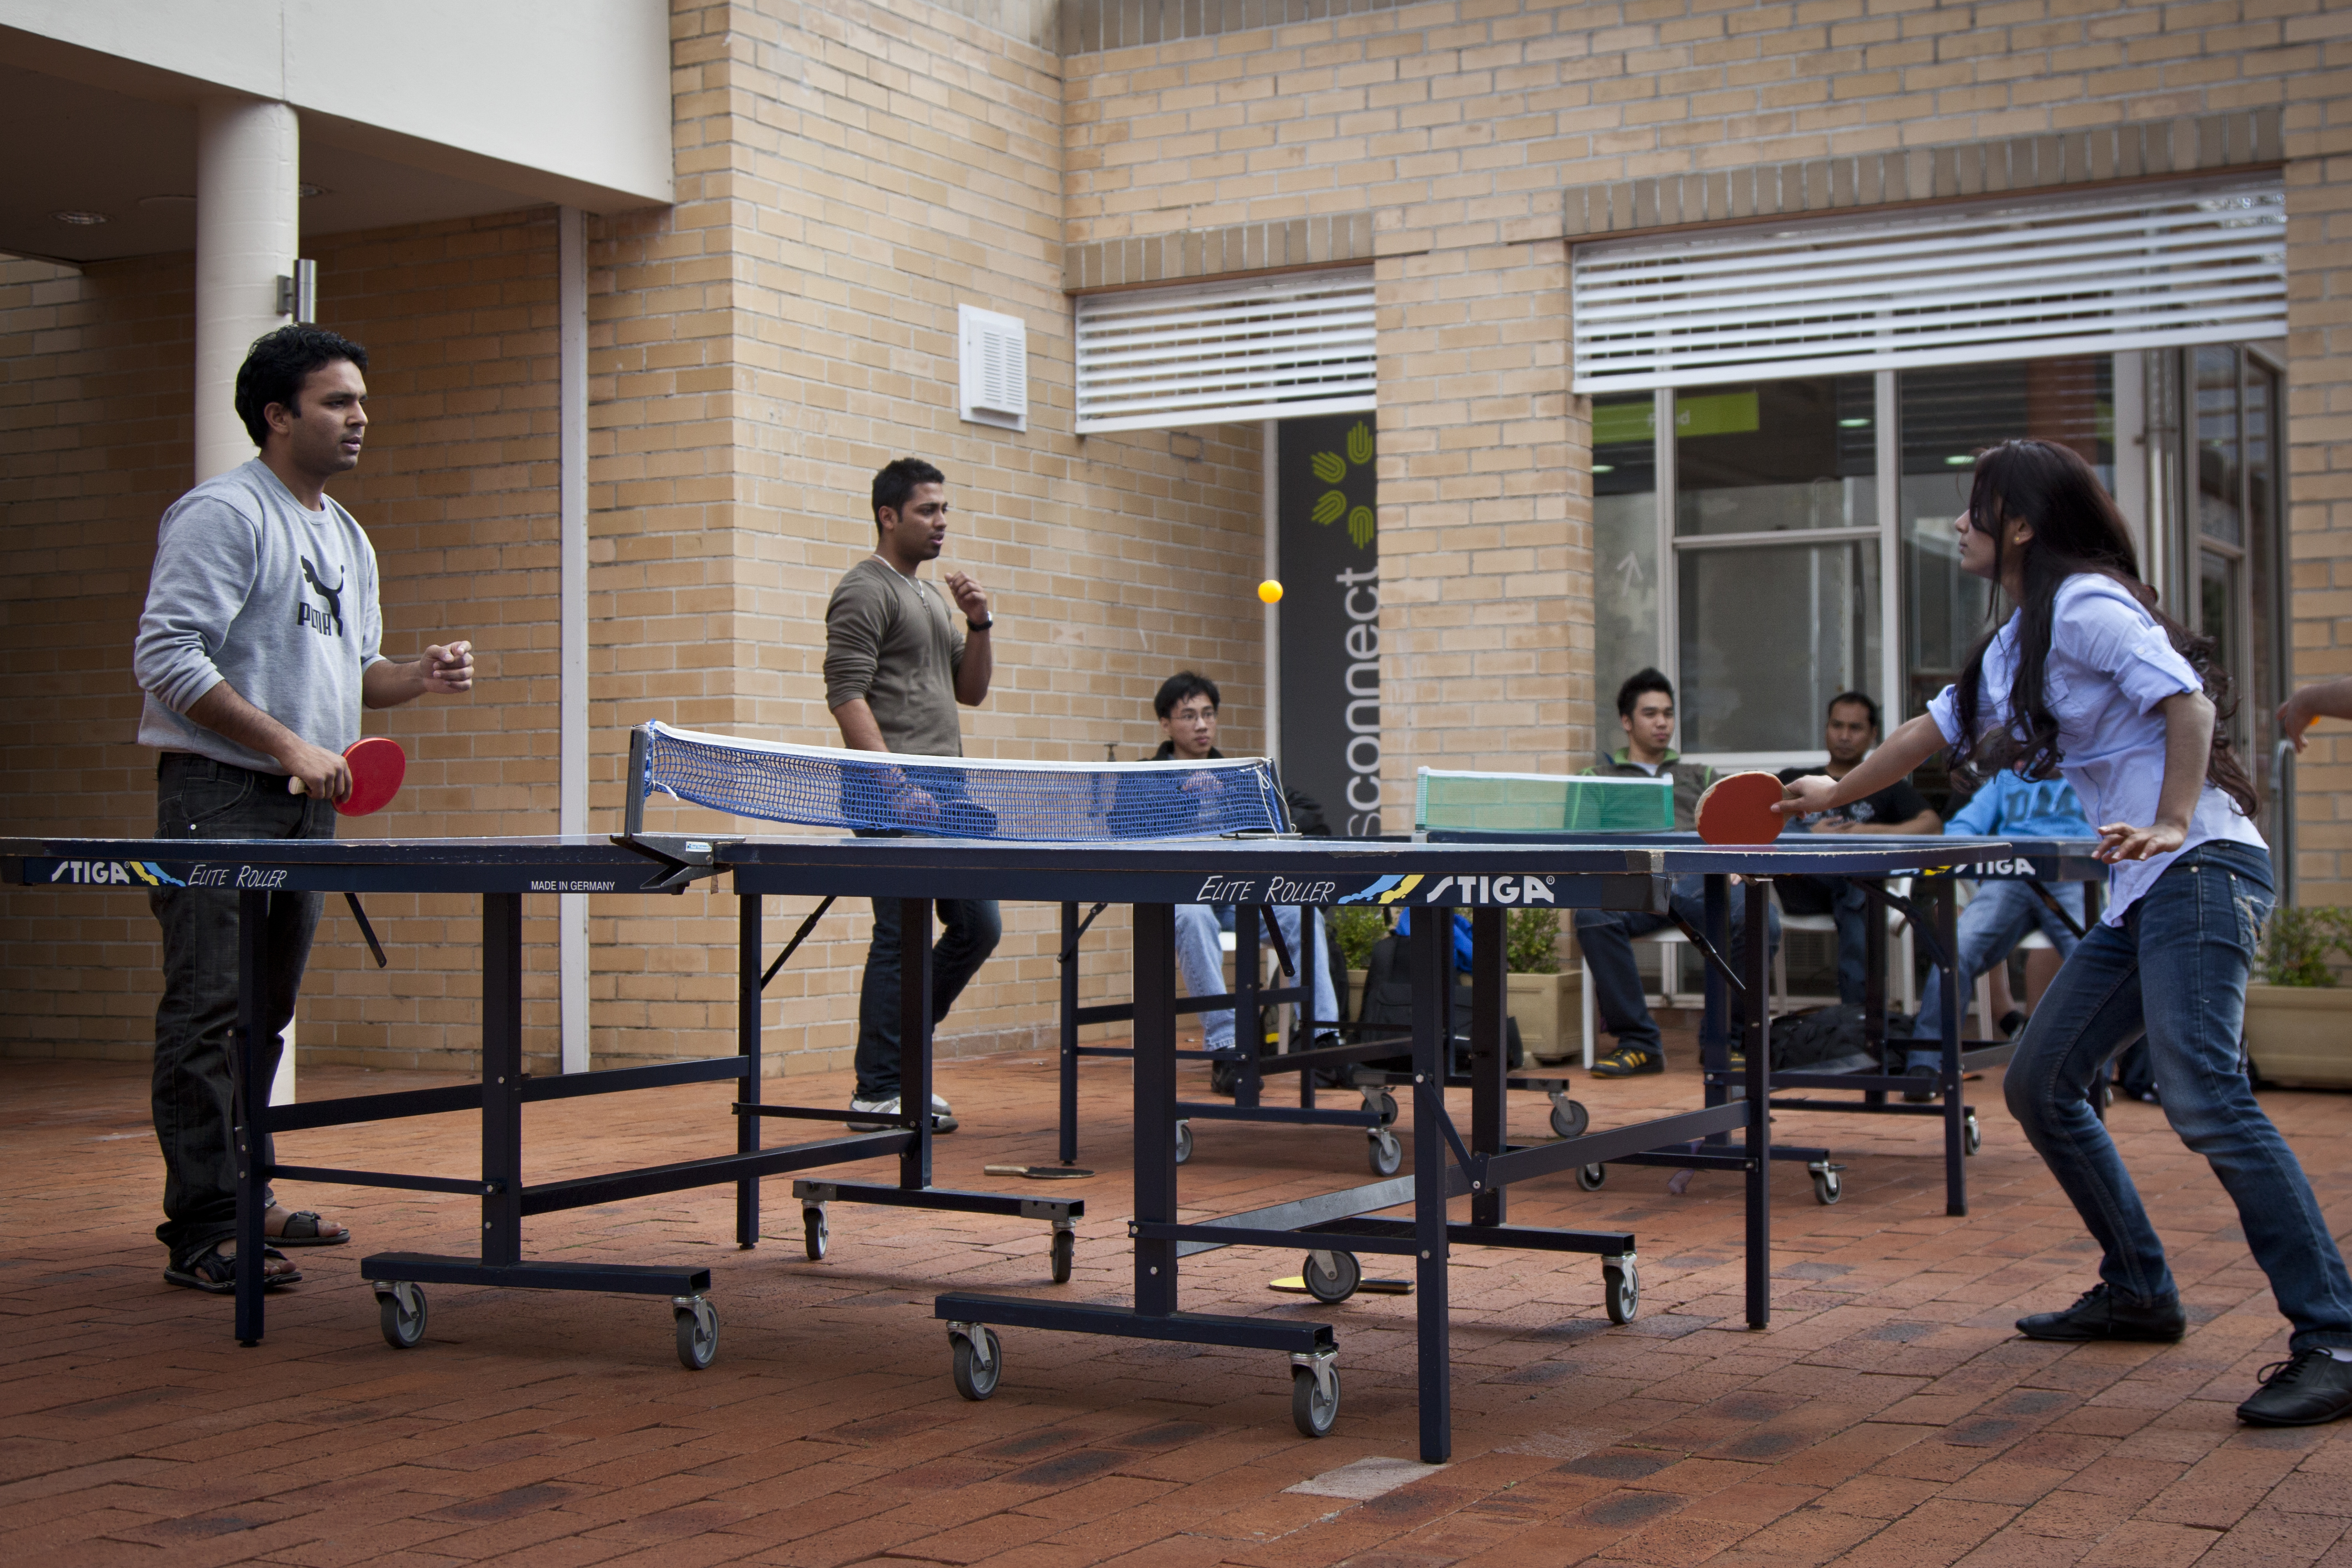 Student life at Western's Campbelltown campus